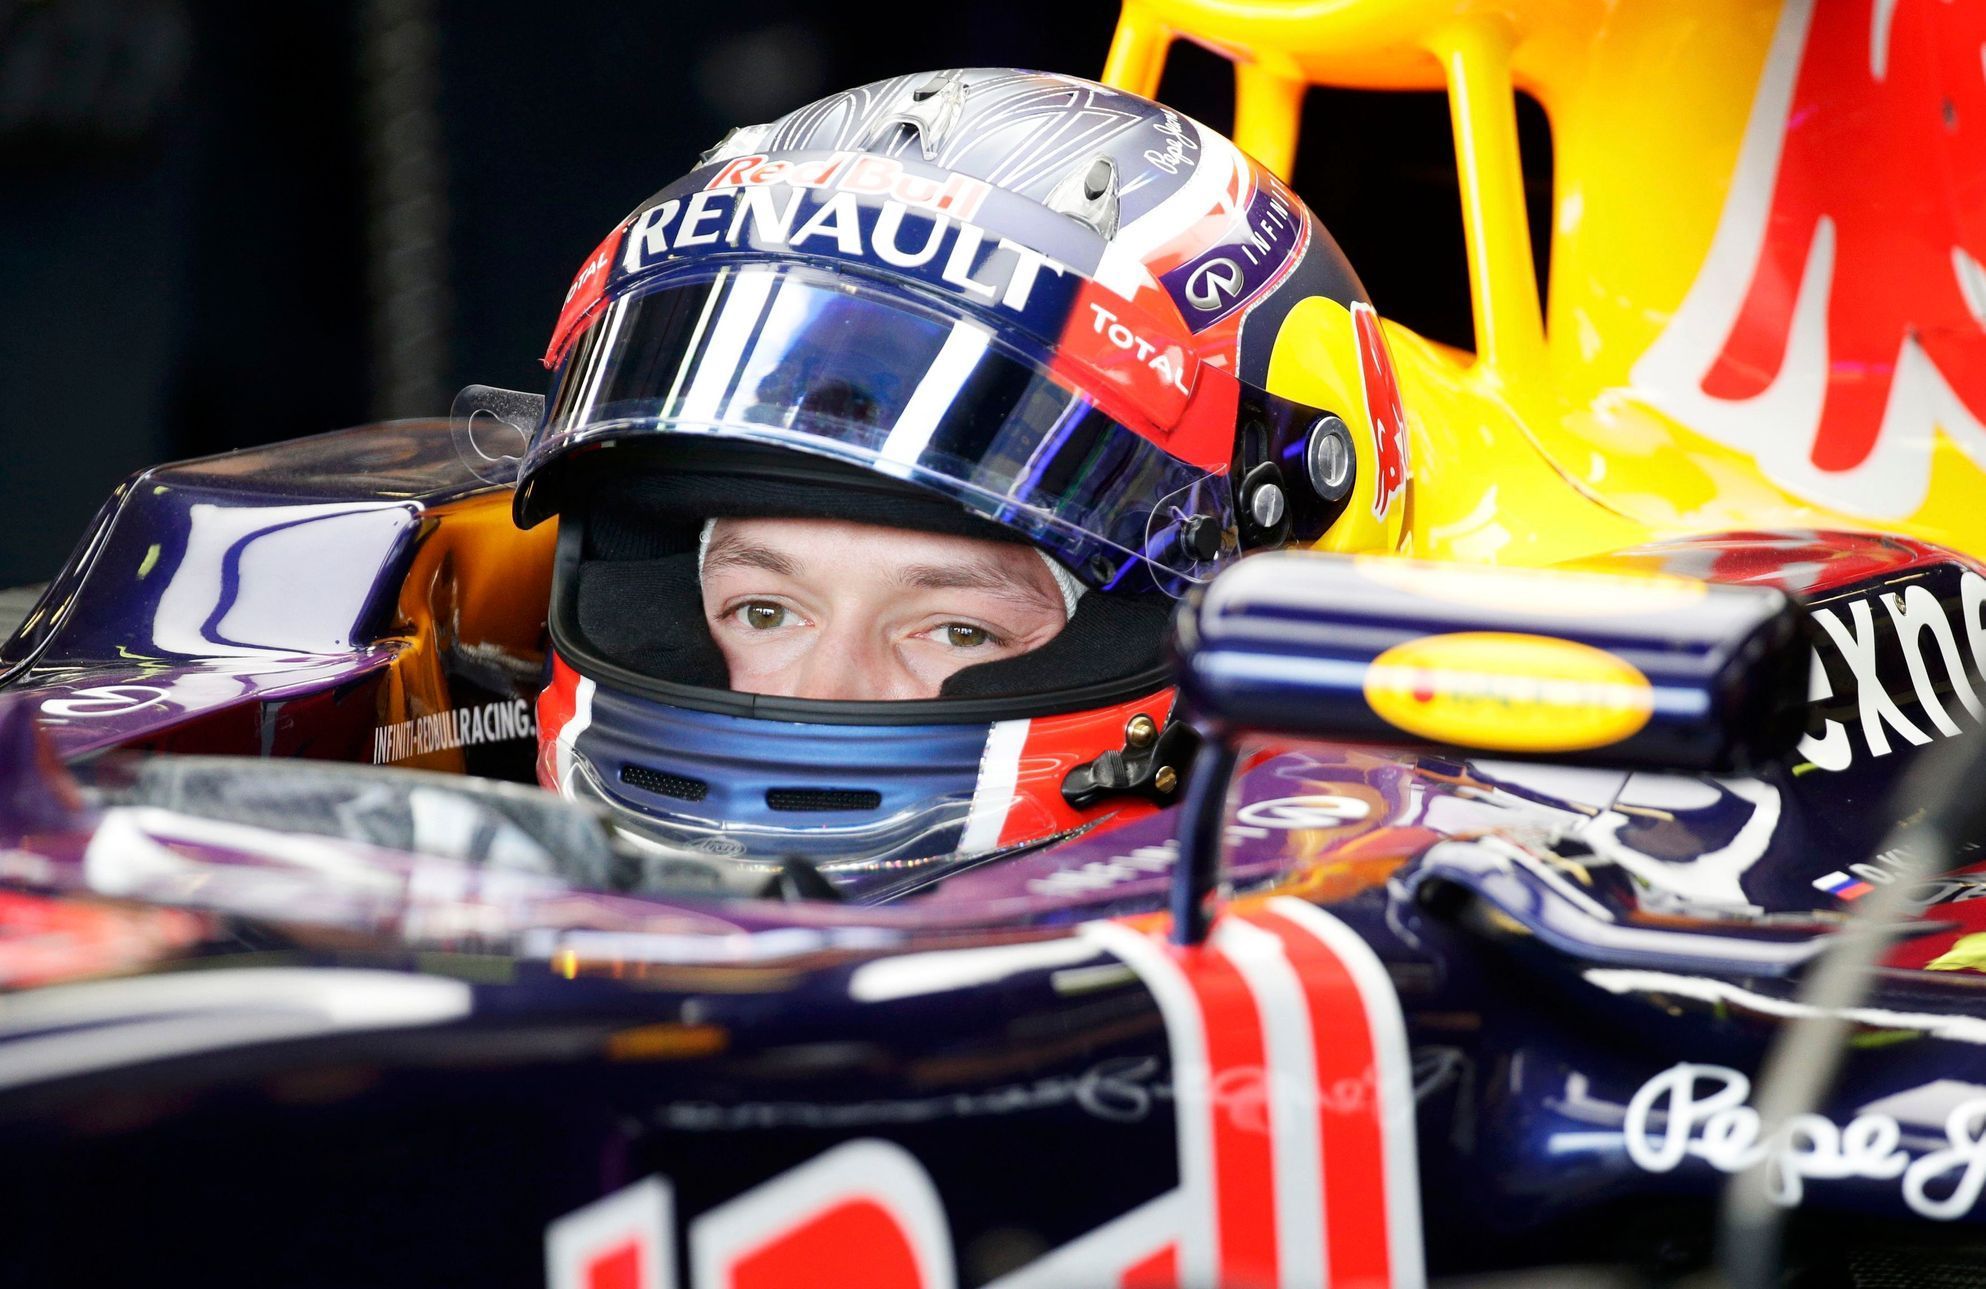 Red Bull Formula One driver Daniil Kvyat of Russia sits in his car in the team garage during the third practice session of the Australian F1 Grand Prix at the Albert Park circuit in Melbourne